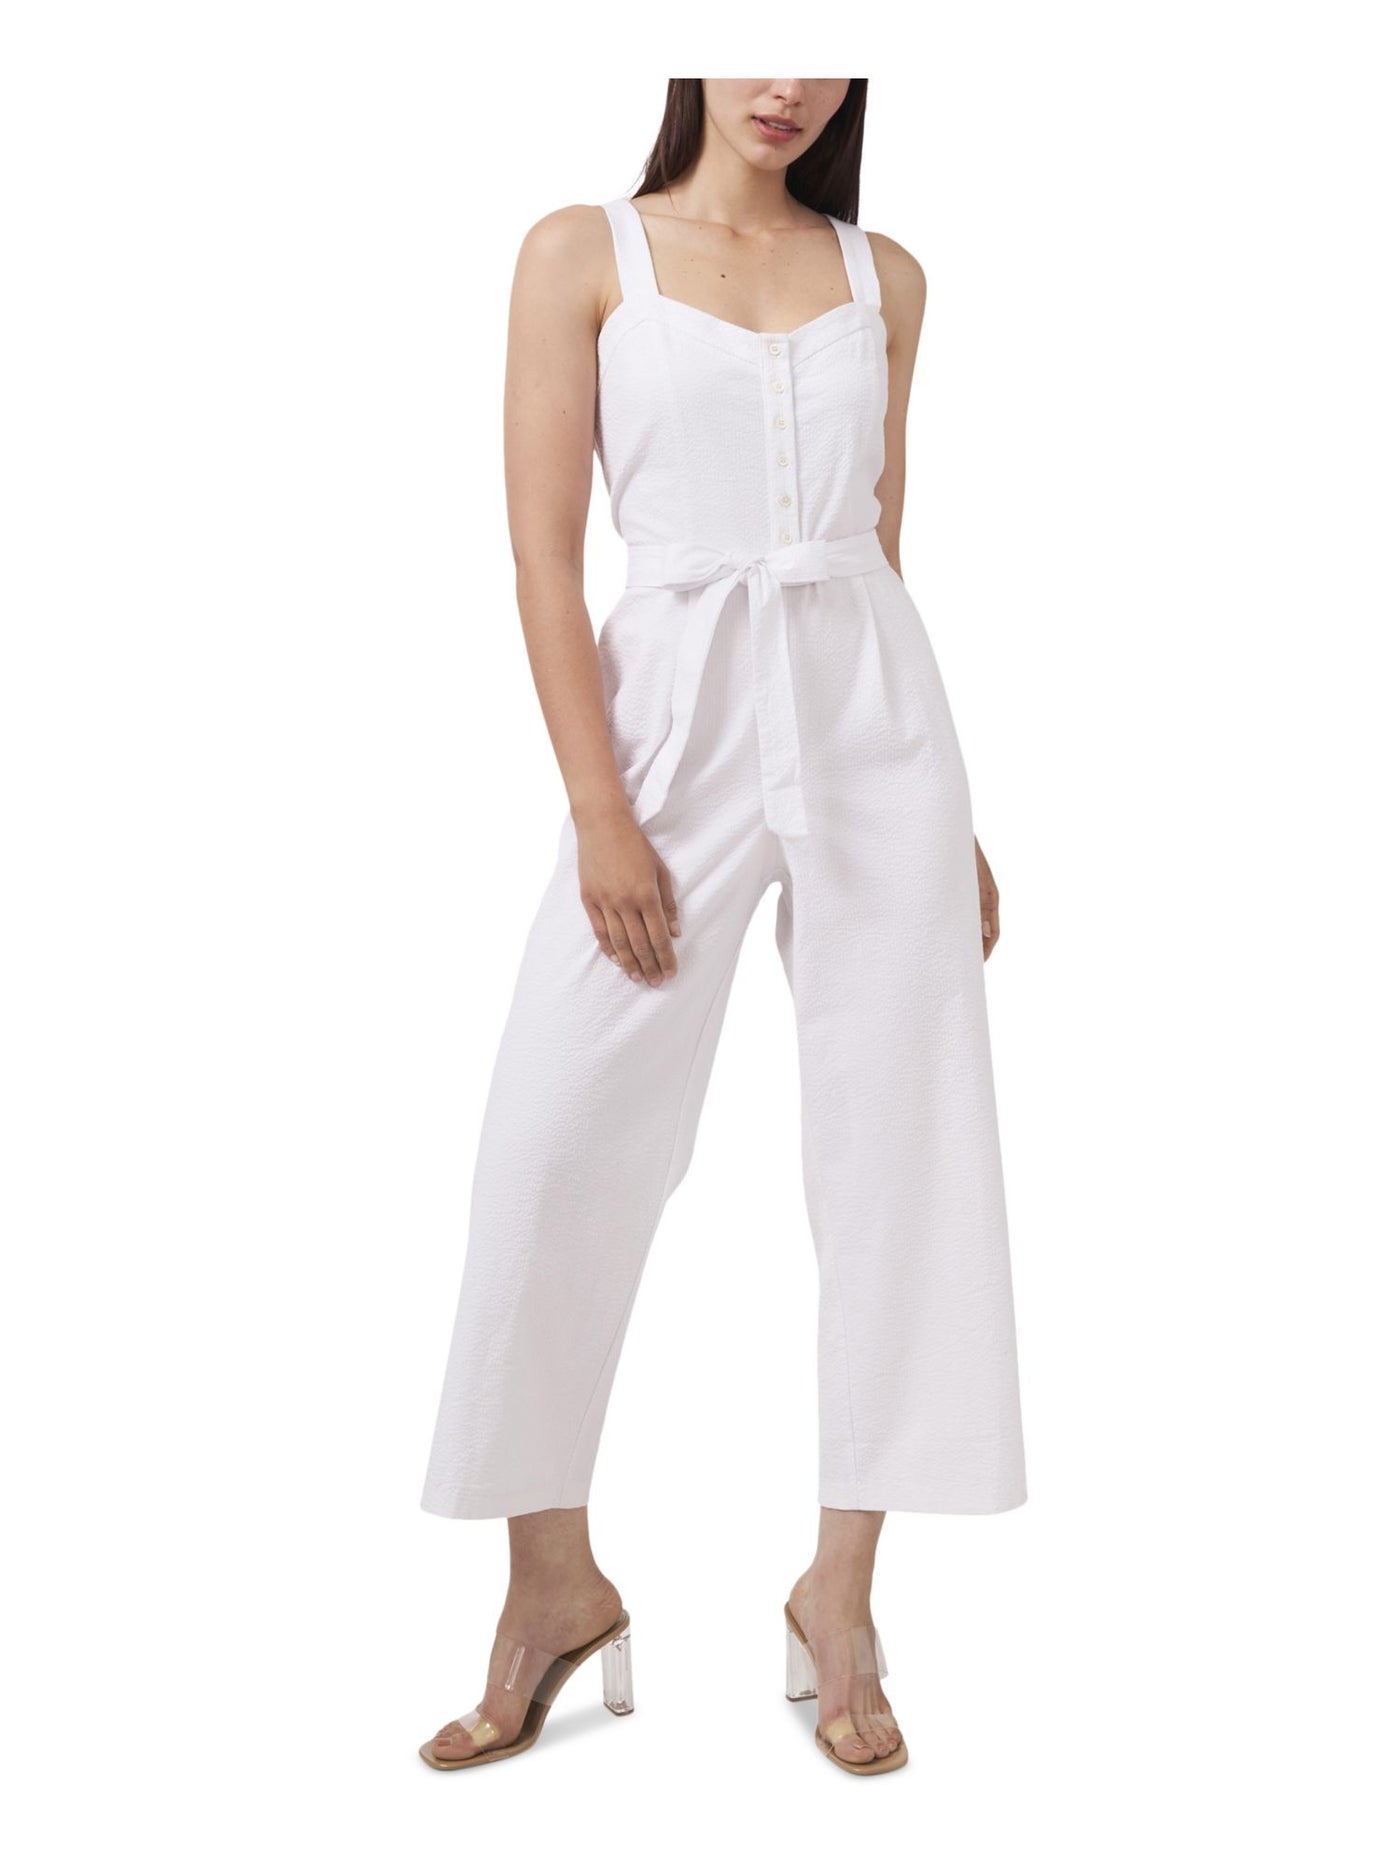 RILEY&RAE Womens White Stretch Zippered Belted Sleeveless Sweetheart Neckline Party Wide Leg Jumpsuit 14